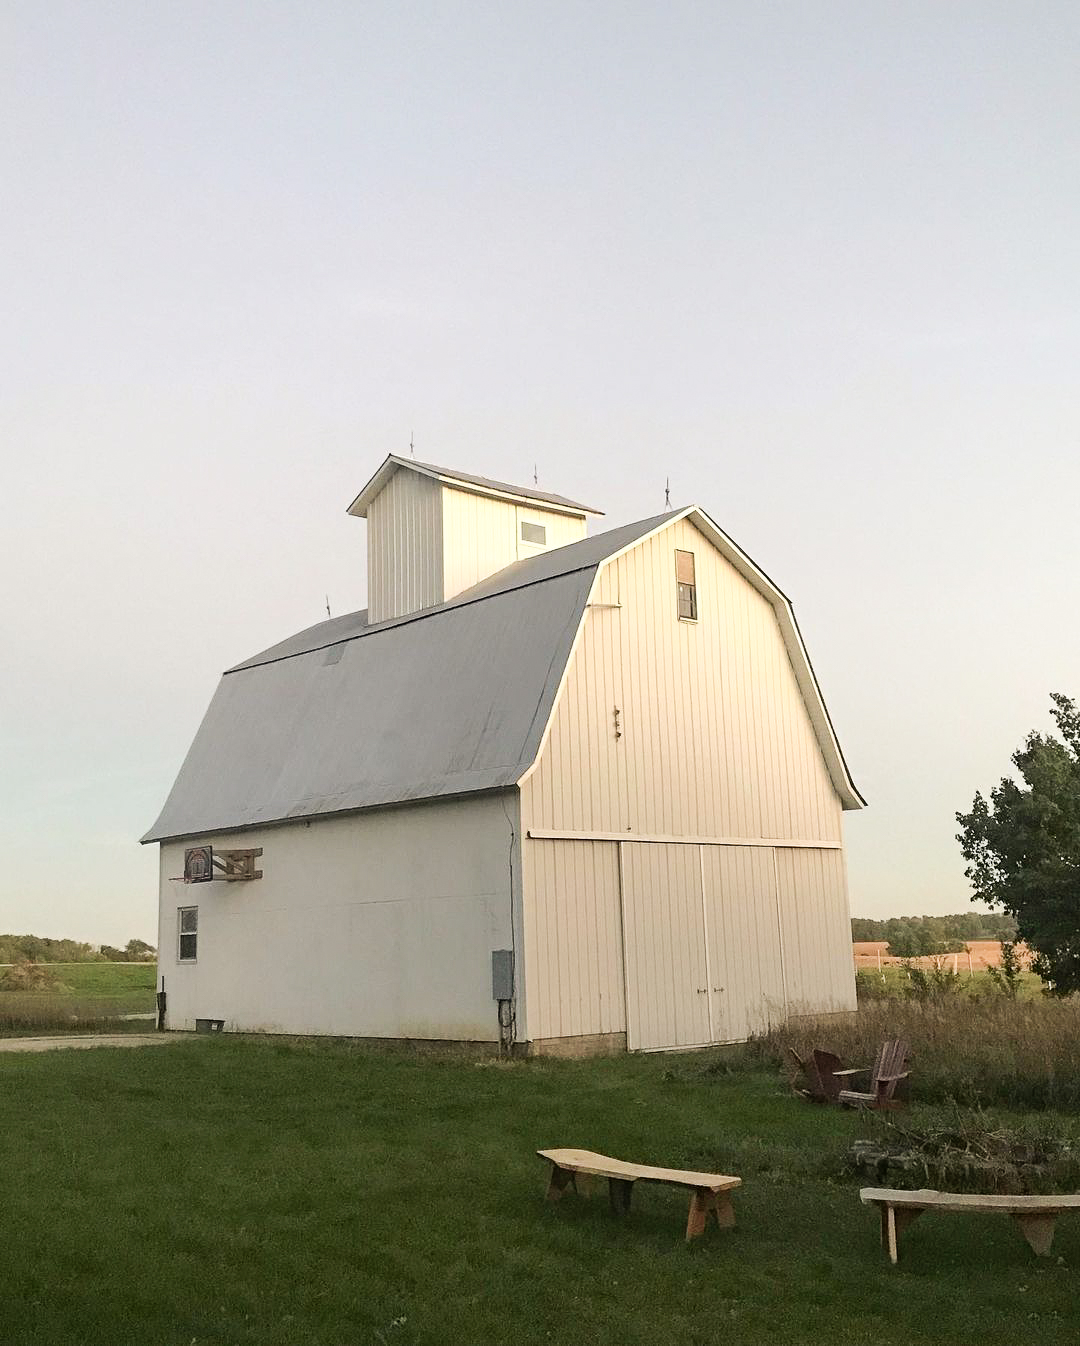 A white barn standing in the countryside